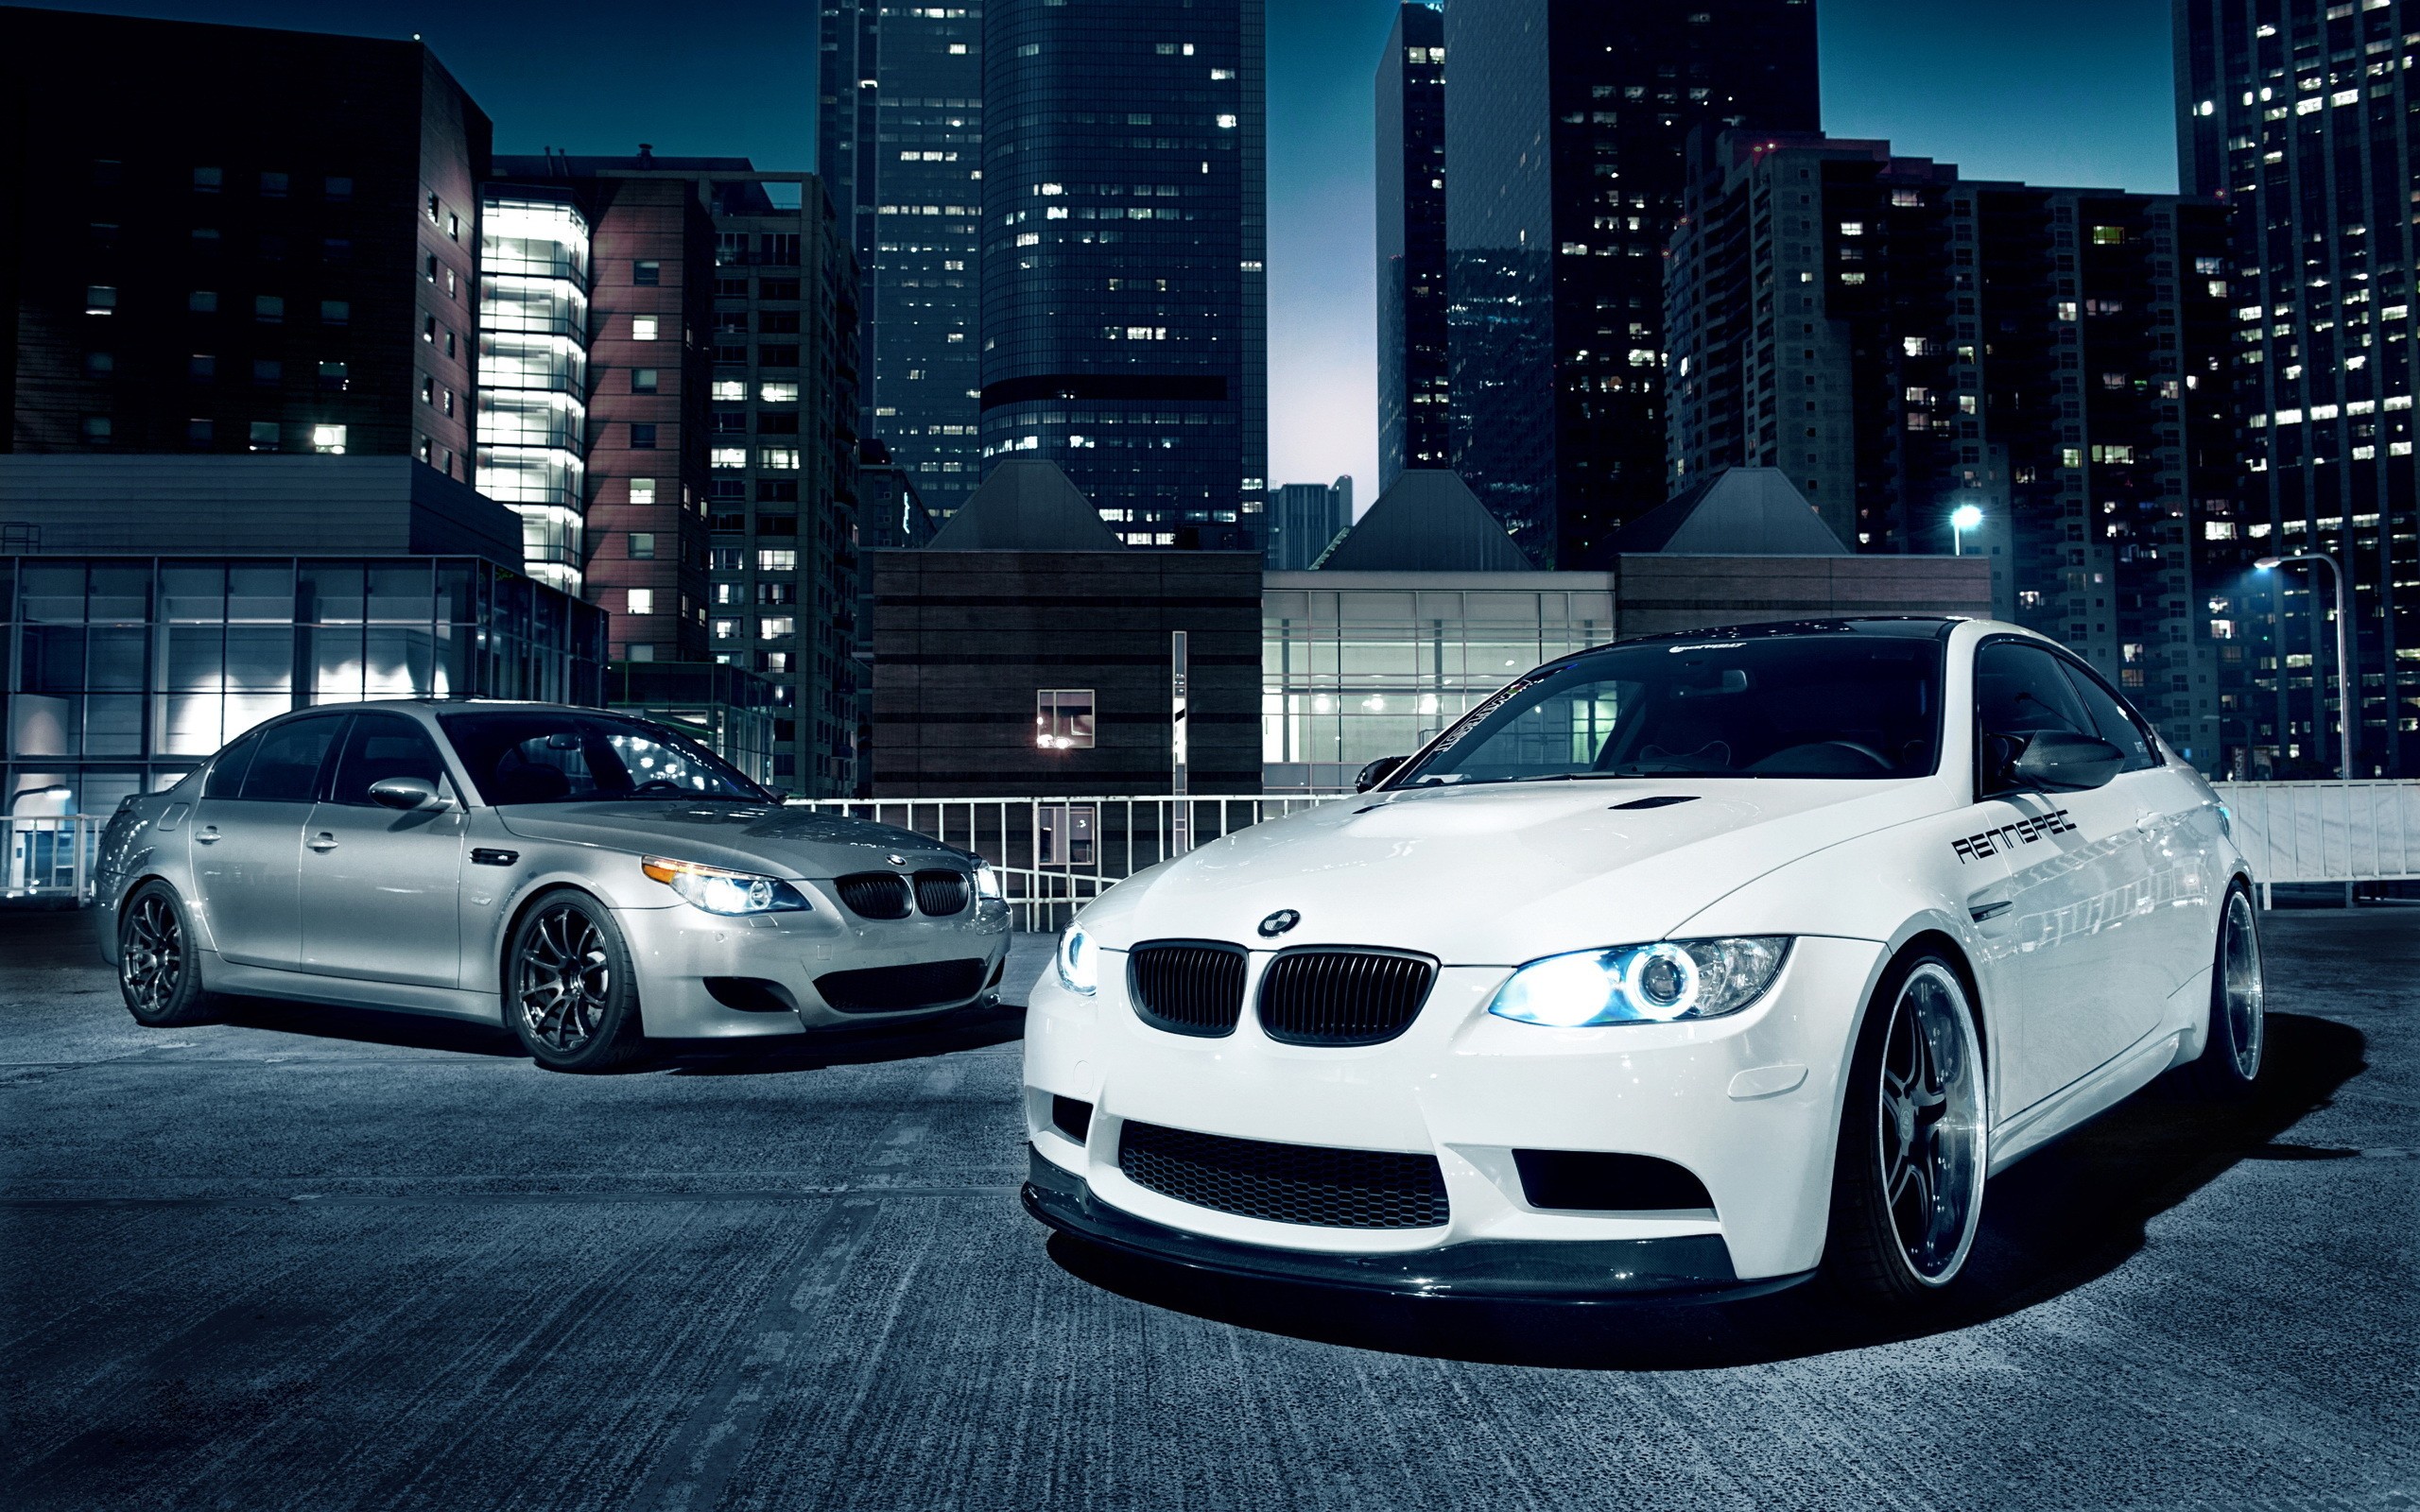 bmw, Cityscapes, Lights, Cars, Tuning, Bmw, M3, Five, Bmw, E92, Cities Wallpaper